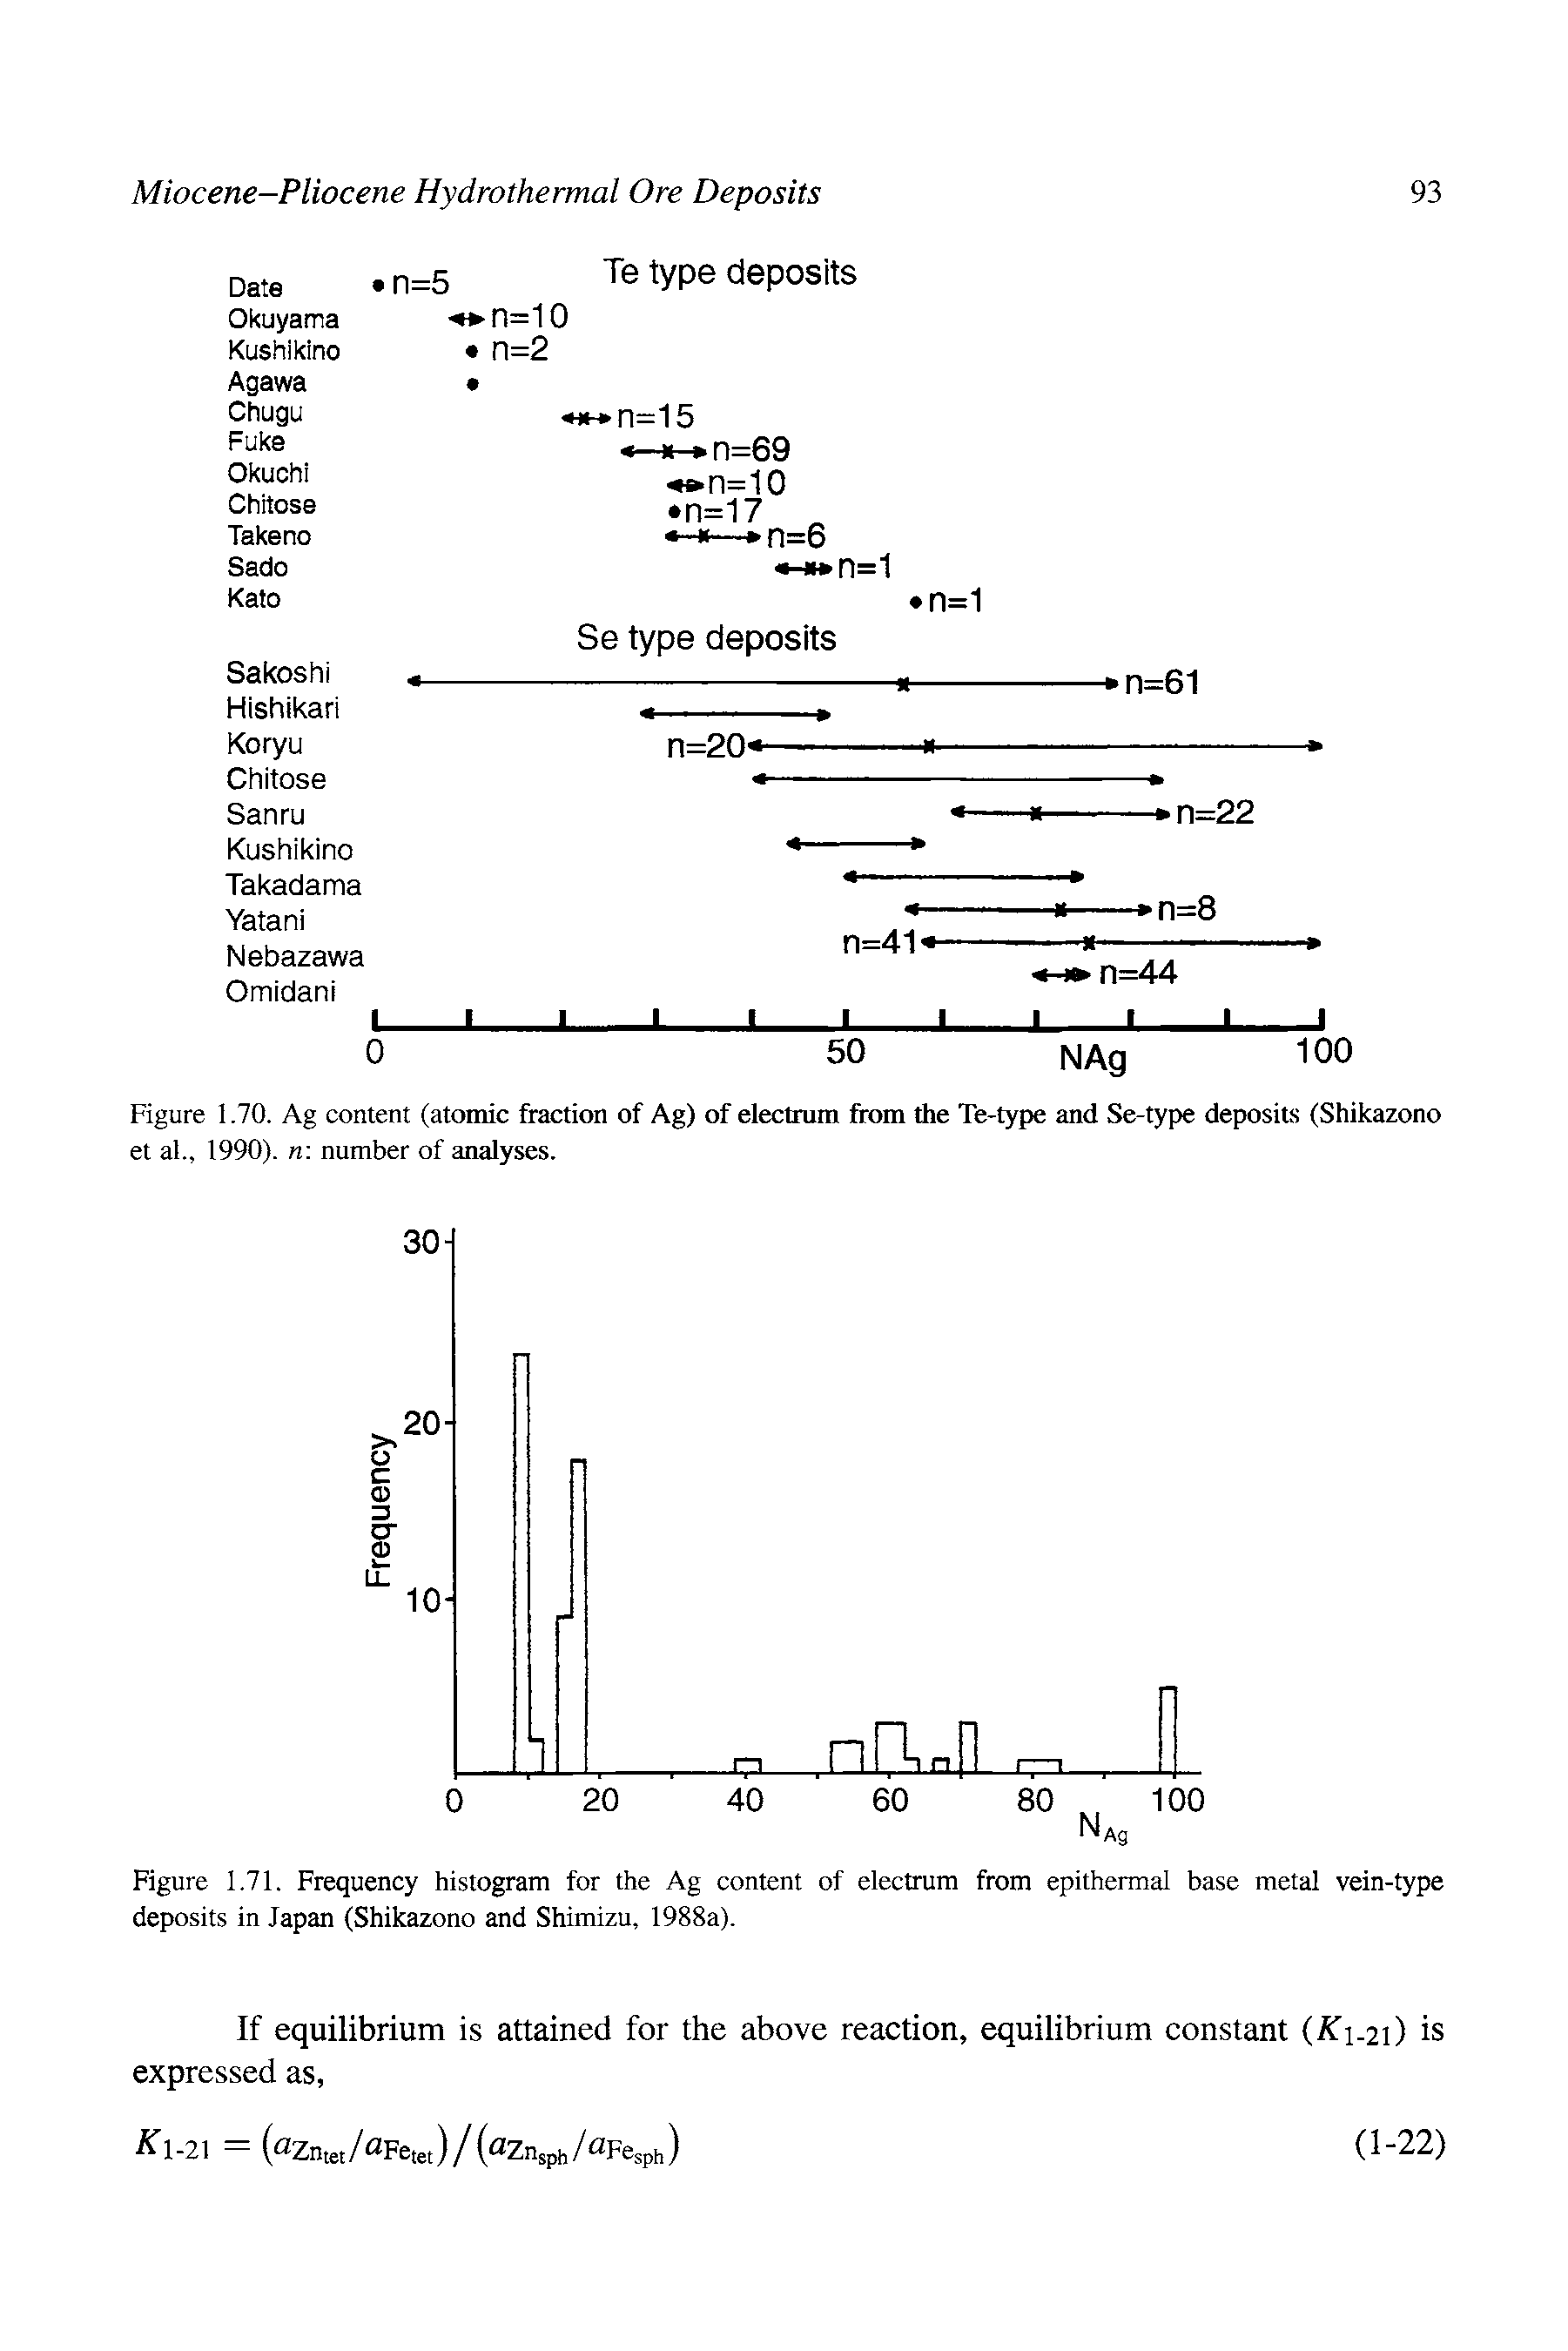 Figure 1.71. Frequency histogram for the Ag content of electrum from epithermal base metal vein-type deposits in Japan (Shikazono and Shimizu, 1988a).